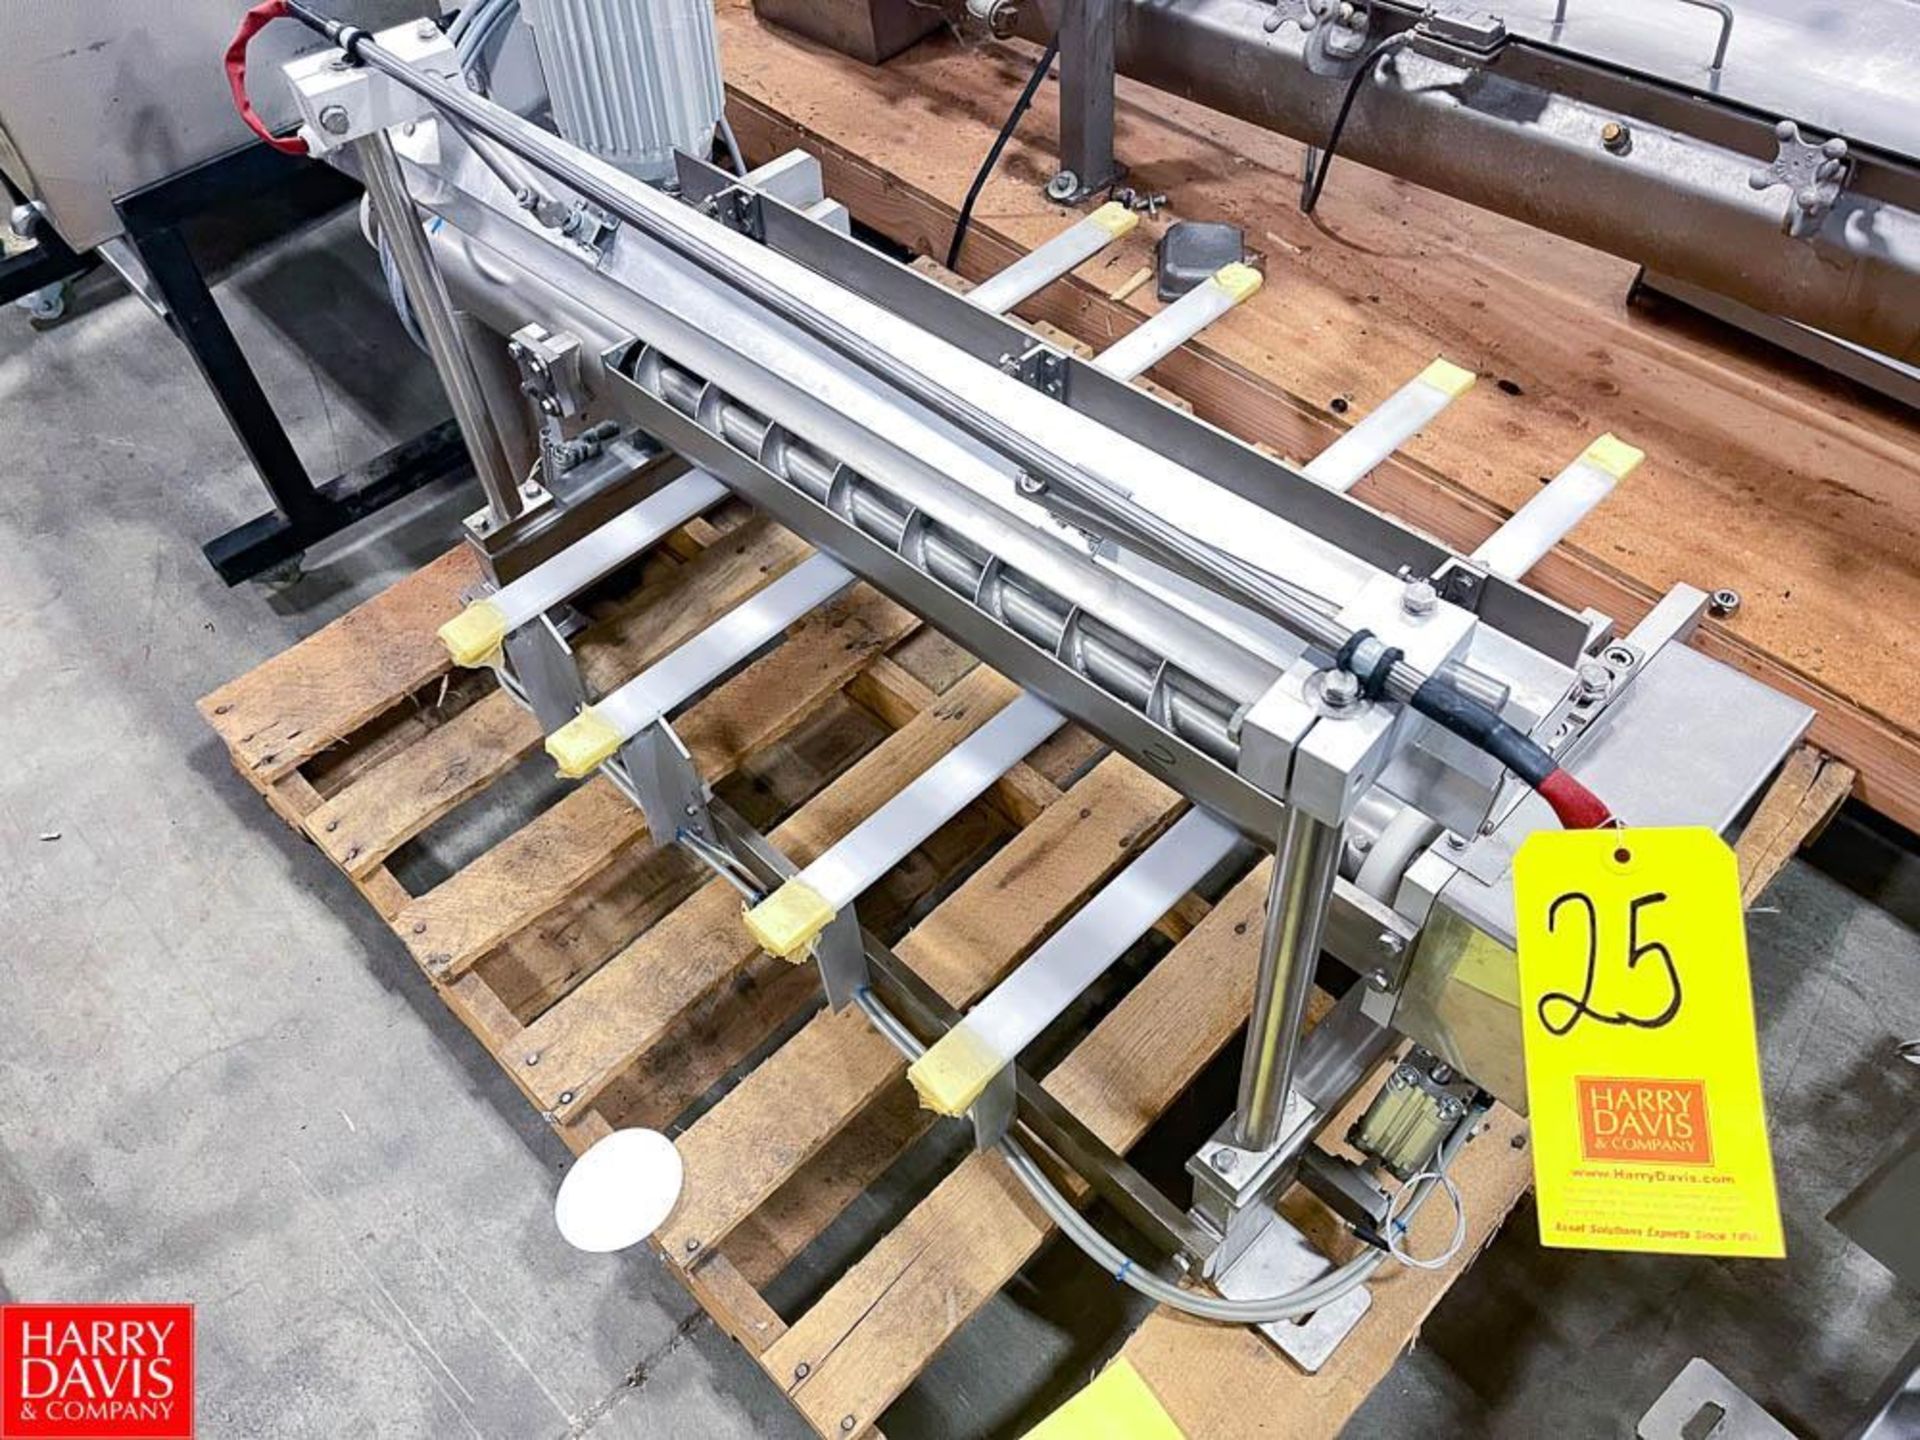 Sheeter with S/S Auger Conveyor, Heater and Roller - Rigging Fee= $75